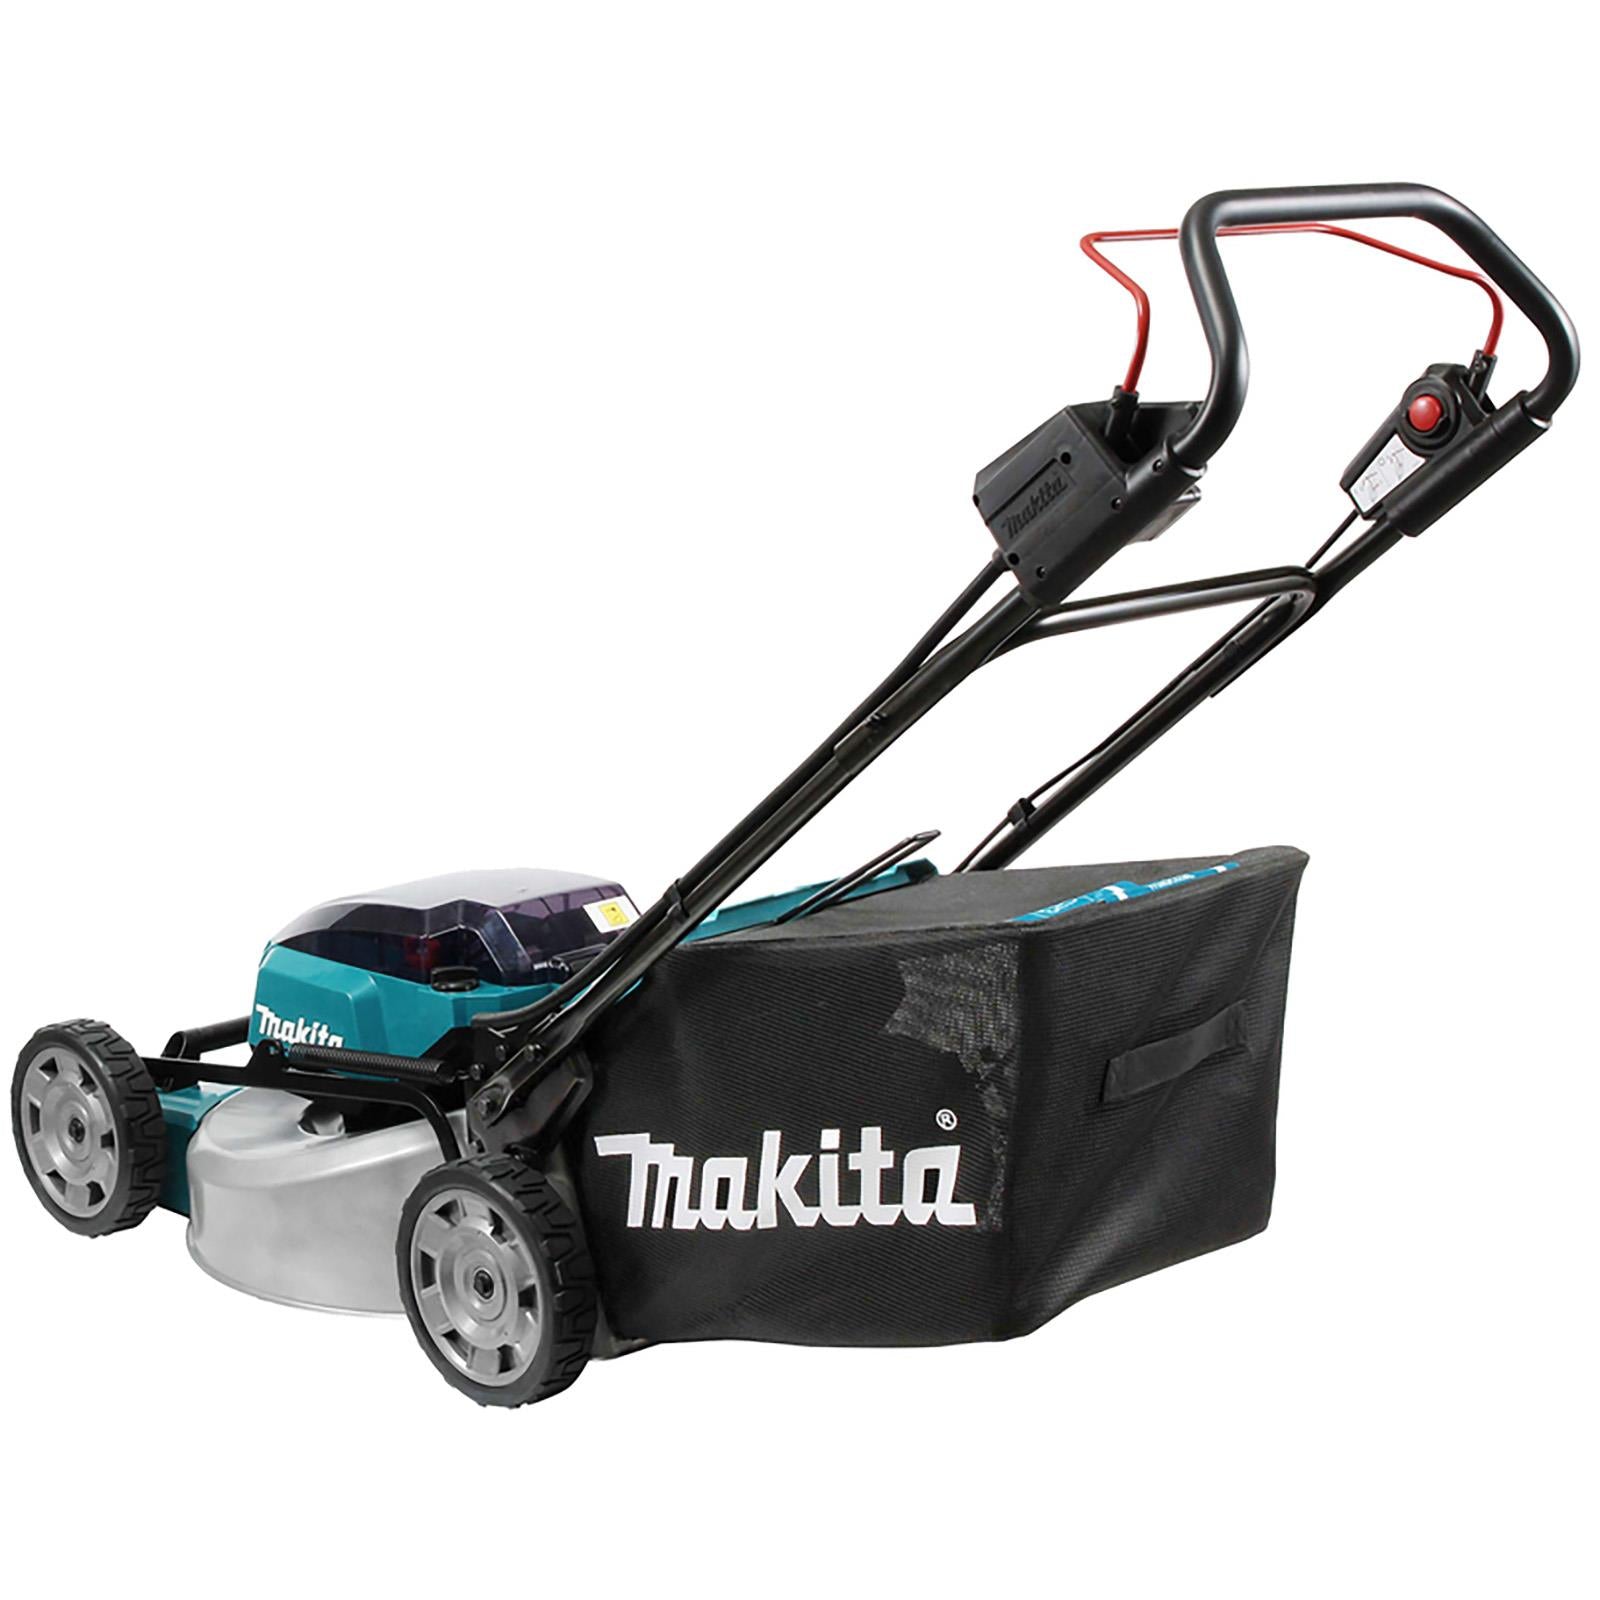 Makita 53cm Lawn Mower Kit Twin 18V LXT Li-ion Cordless Garden Grass Outdoor 2 x 6Ah Battery and Dual Rapid Charger DLM530PG2